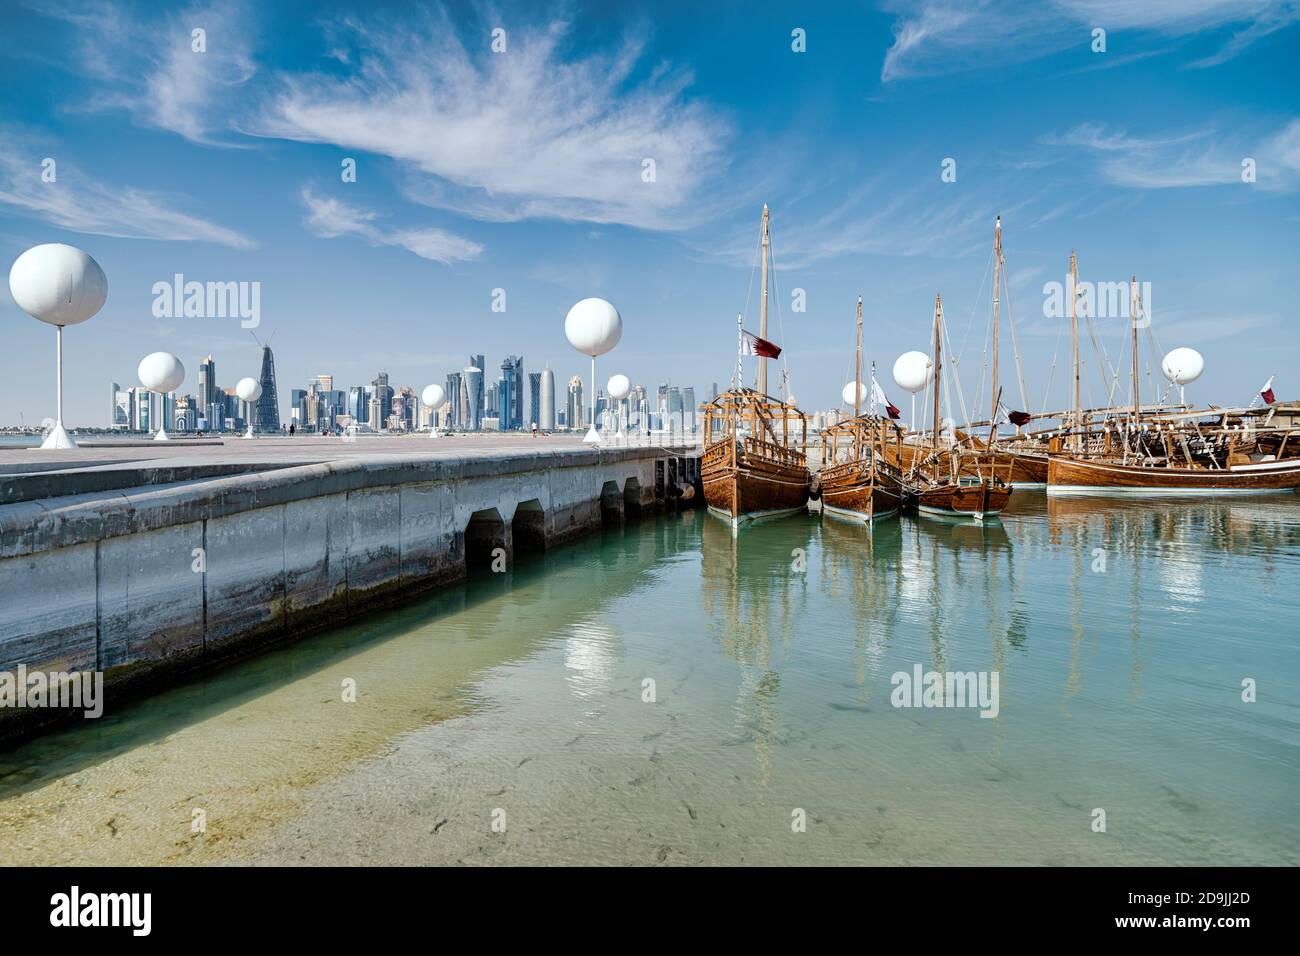 DOHA, QATAR - 1. JANUARY 2020: Traditional Qatari Dhow boats in the harbor with iconic Doha skyline in the background, Doha, Qatar, Middle East. Stock Photo